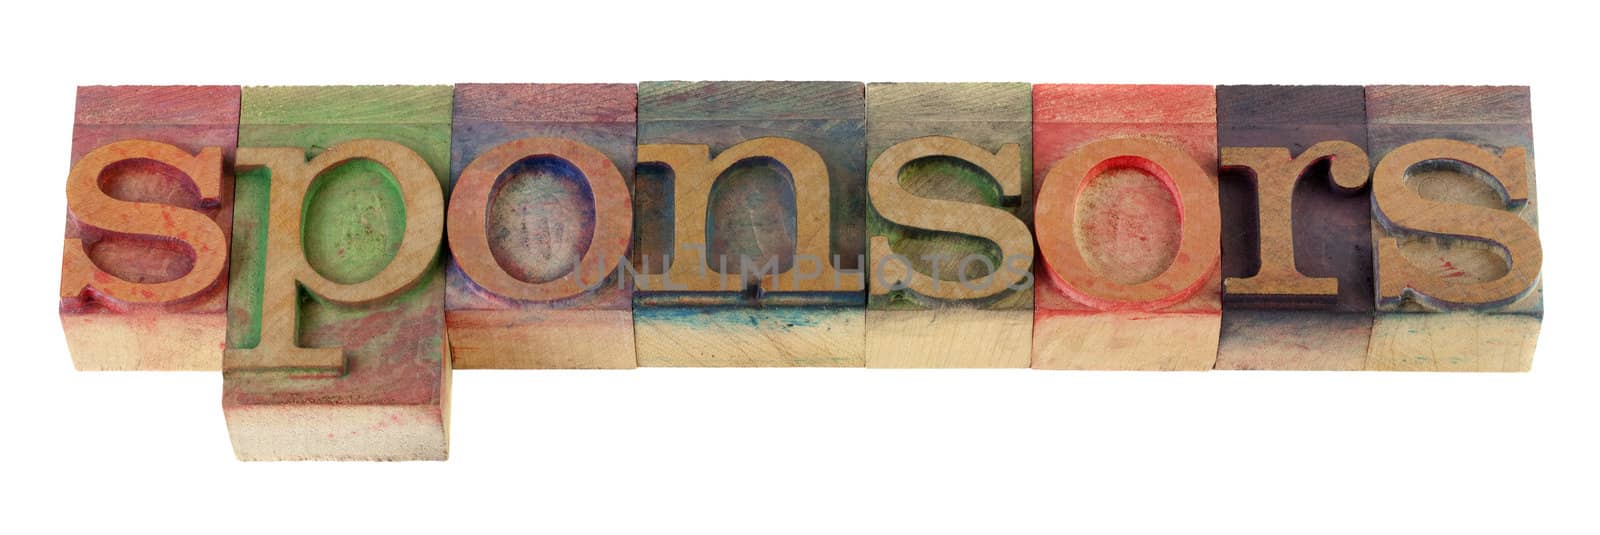 the sponsors word in vintage wooden letterpress type blocks, stained by color ink, isolated on white